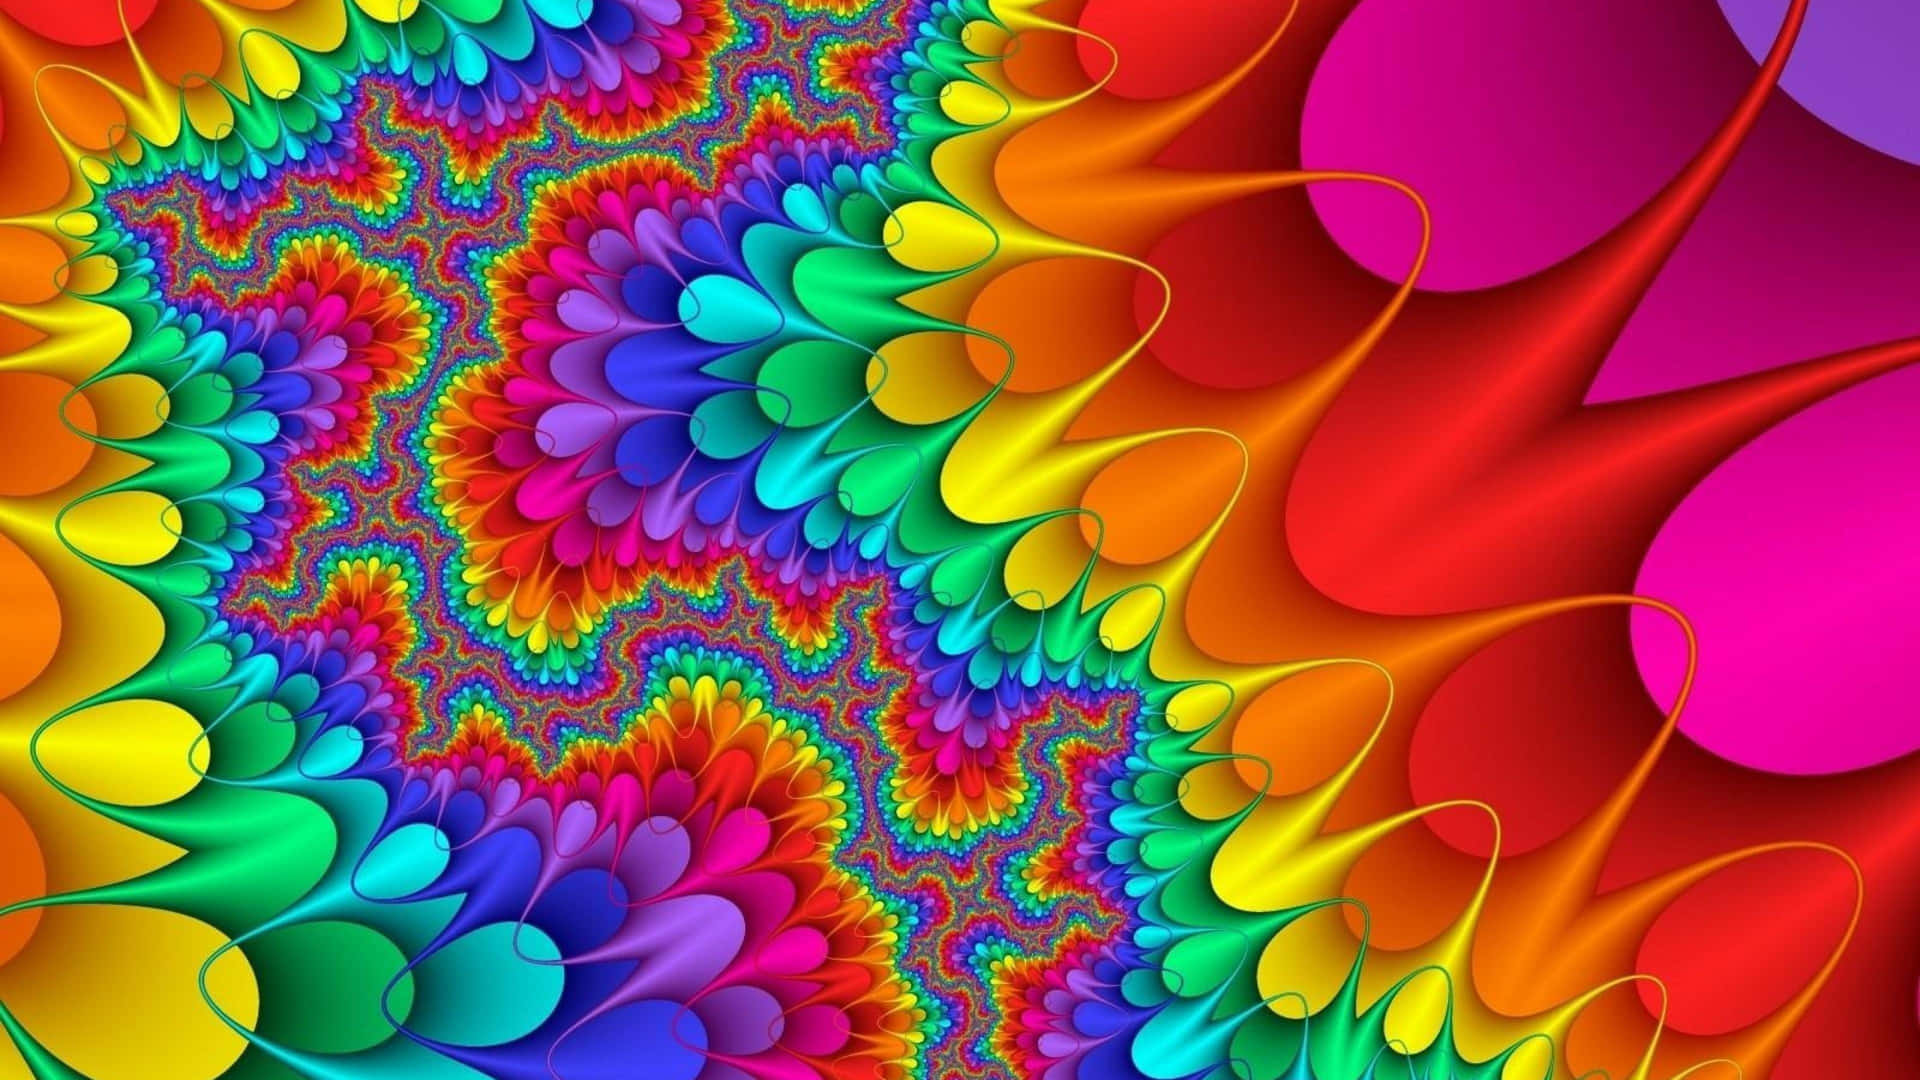 A cosmic journey through the psychedelic realm Wallpaper